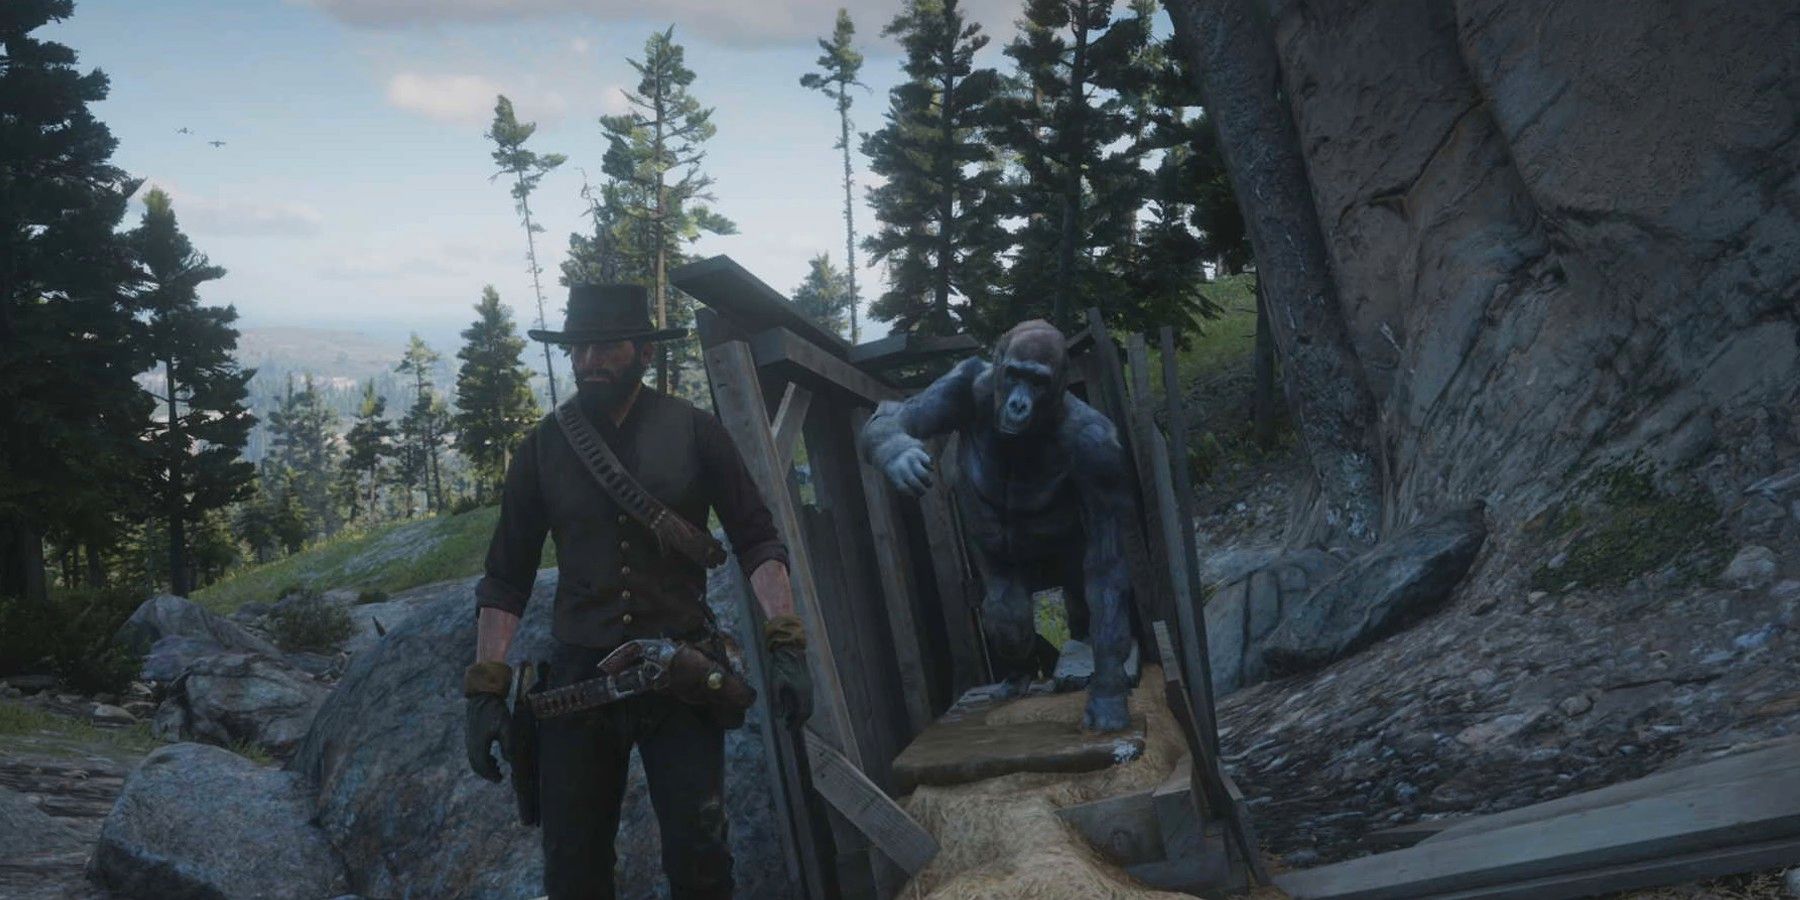 Red Dead Redemption 2: Where to Find the Gorilla Easter Egg